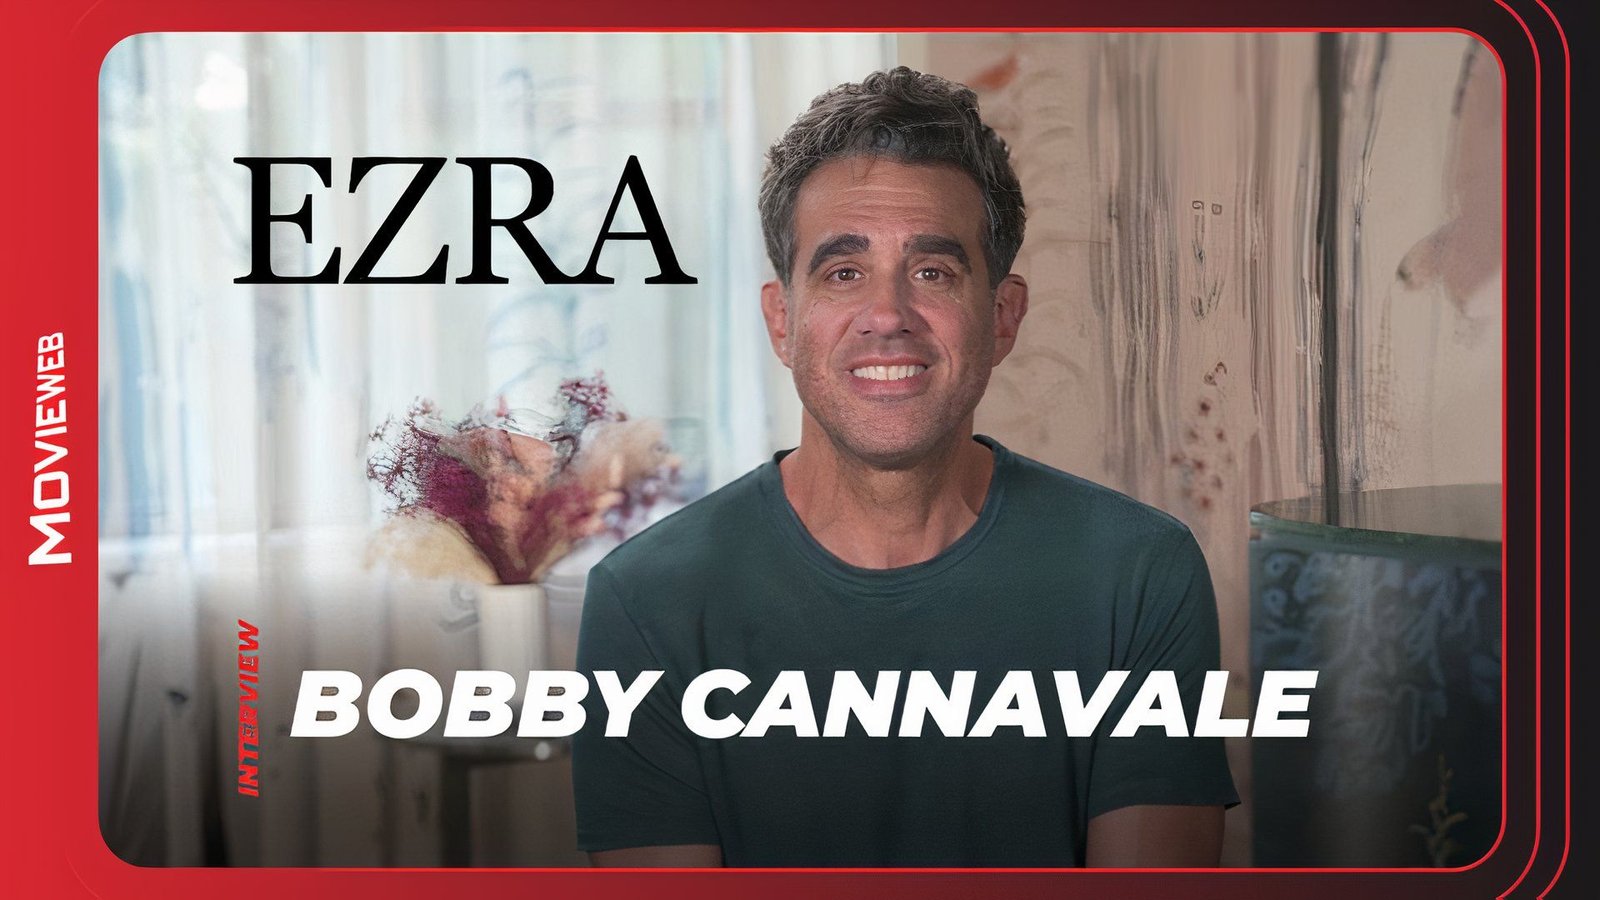 Bobby Cannavale Says He Was Deeply Moved by Ezra's Storyline